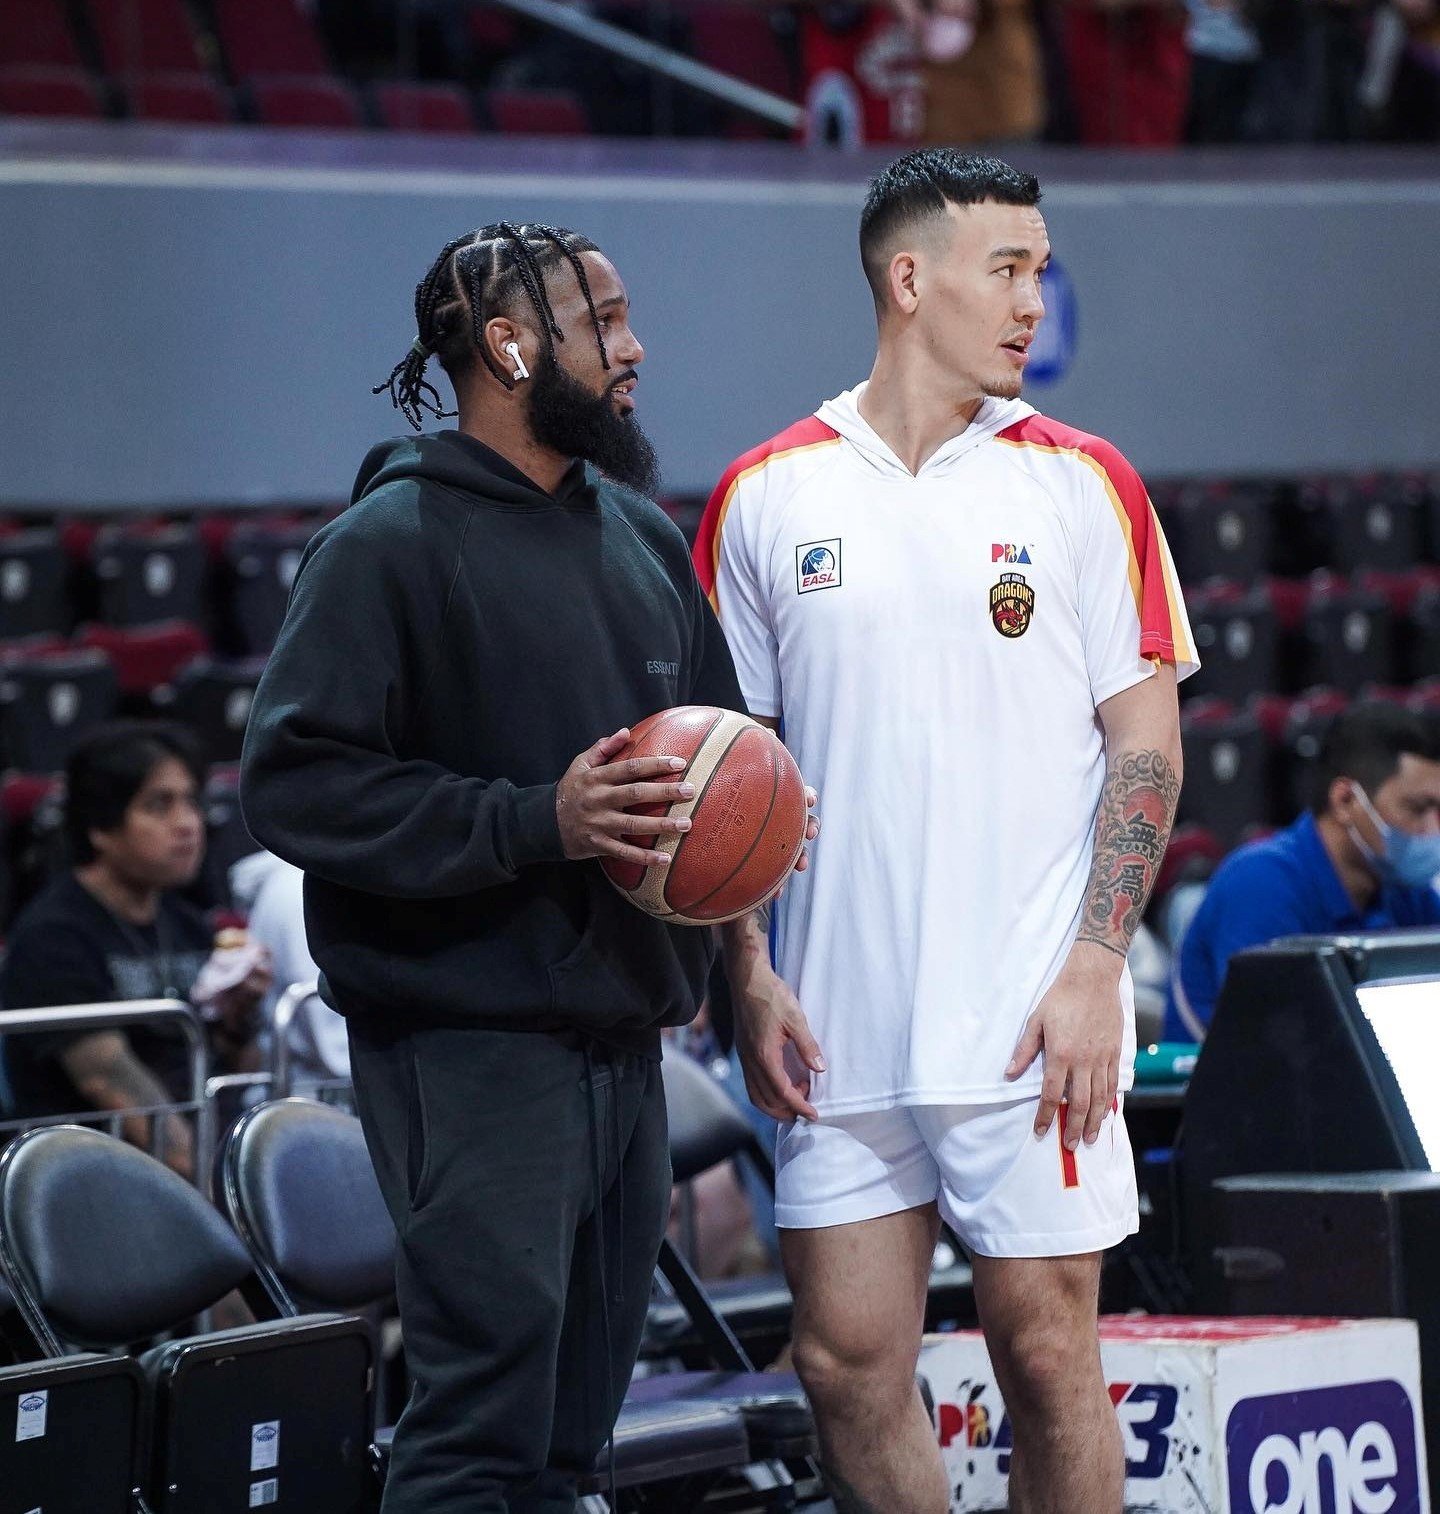 Starting point guard Glen Yang (right) will return in the crucial Game 6 on Wednesday. Photo: Handout